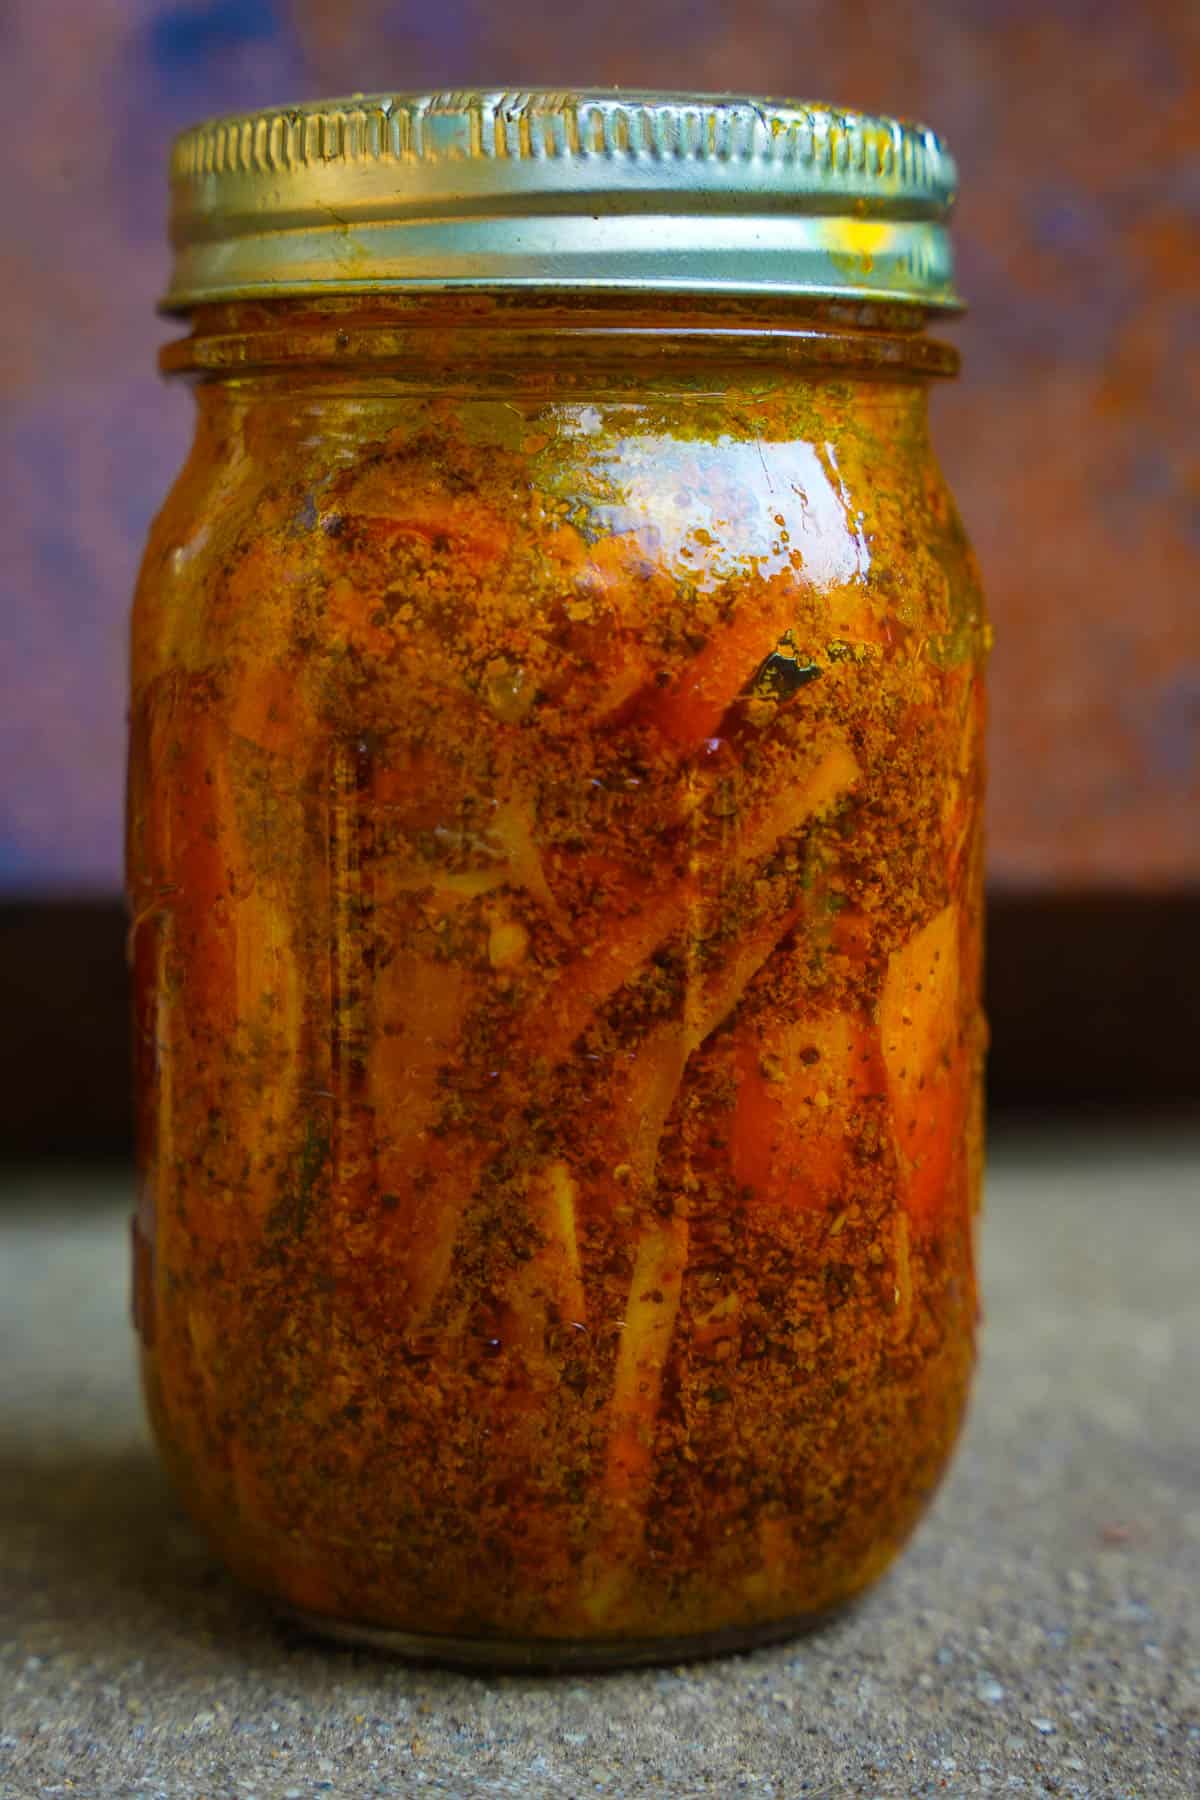 Carrot pickle in a jar is fermented for 24-48 hours.